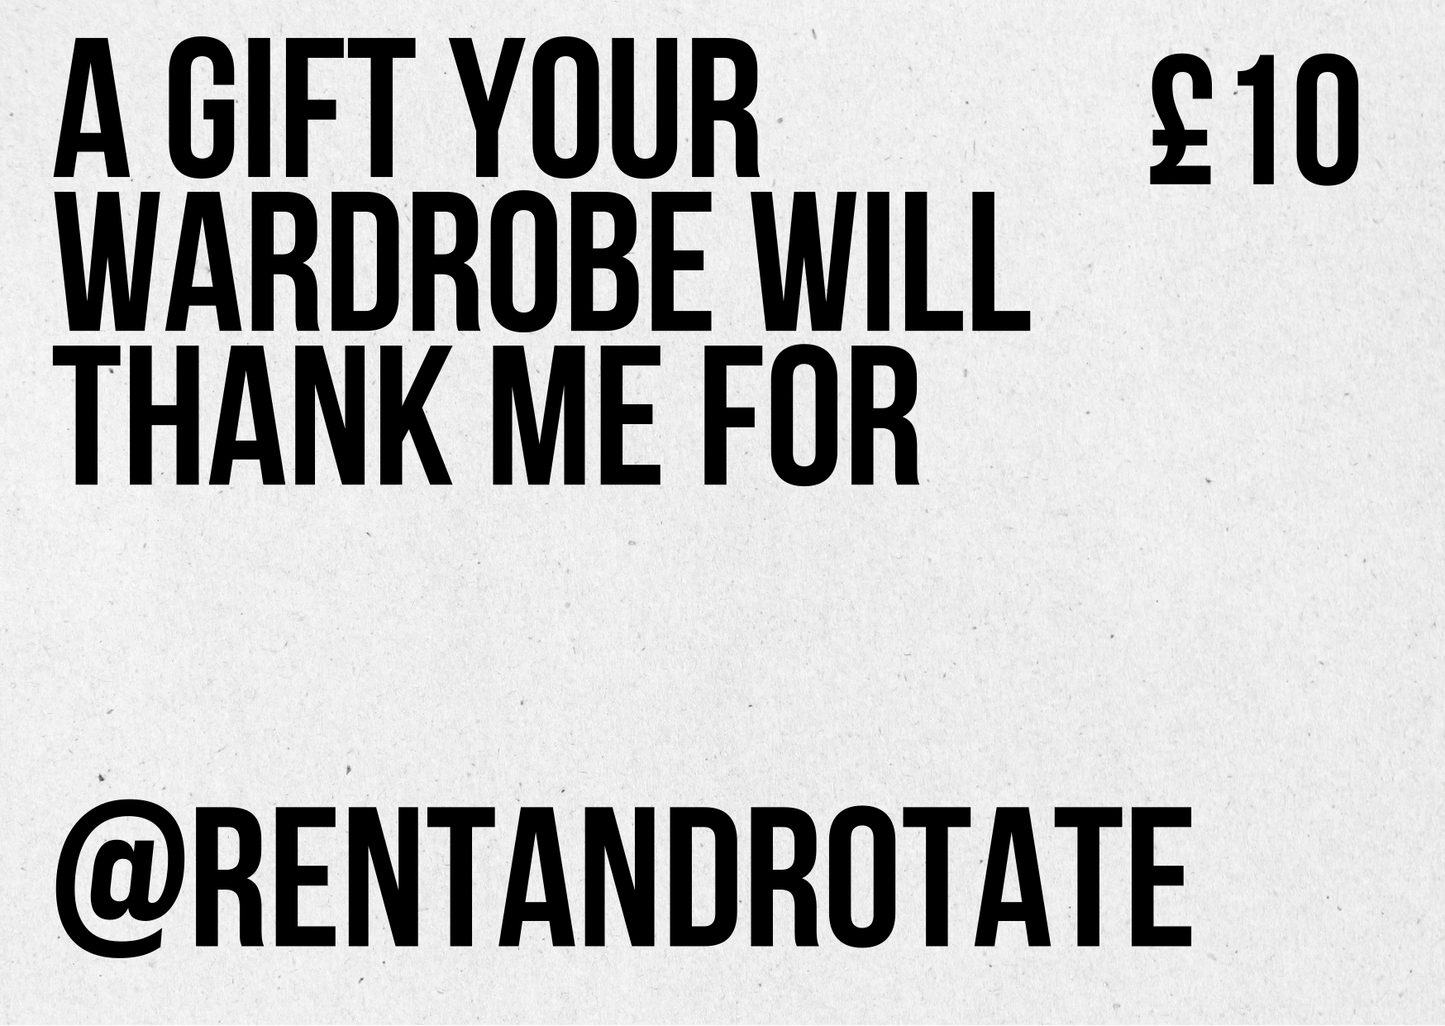 Rent and Rotate Gift Card